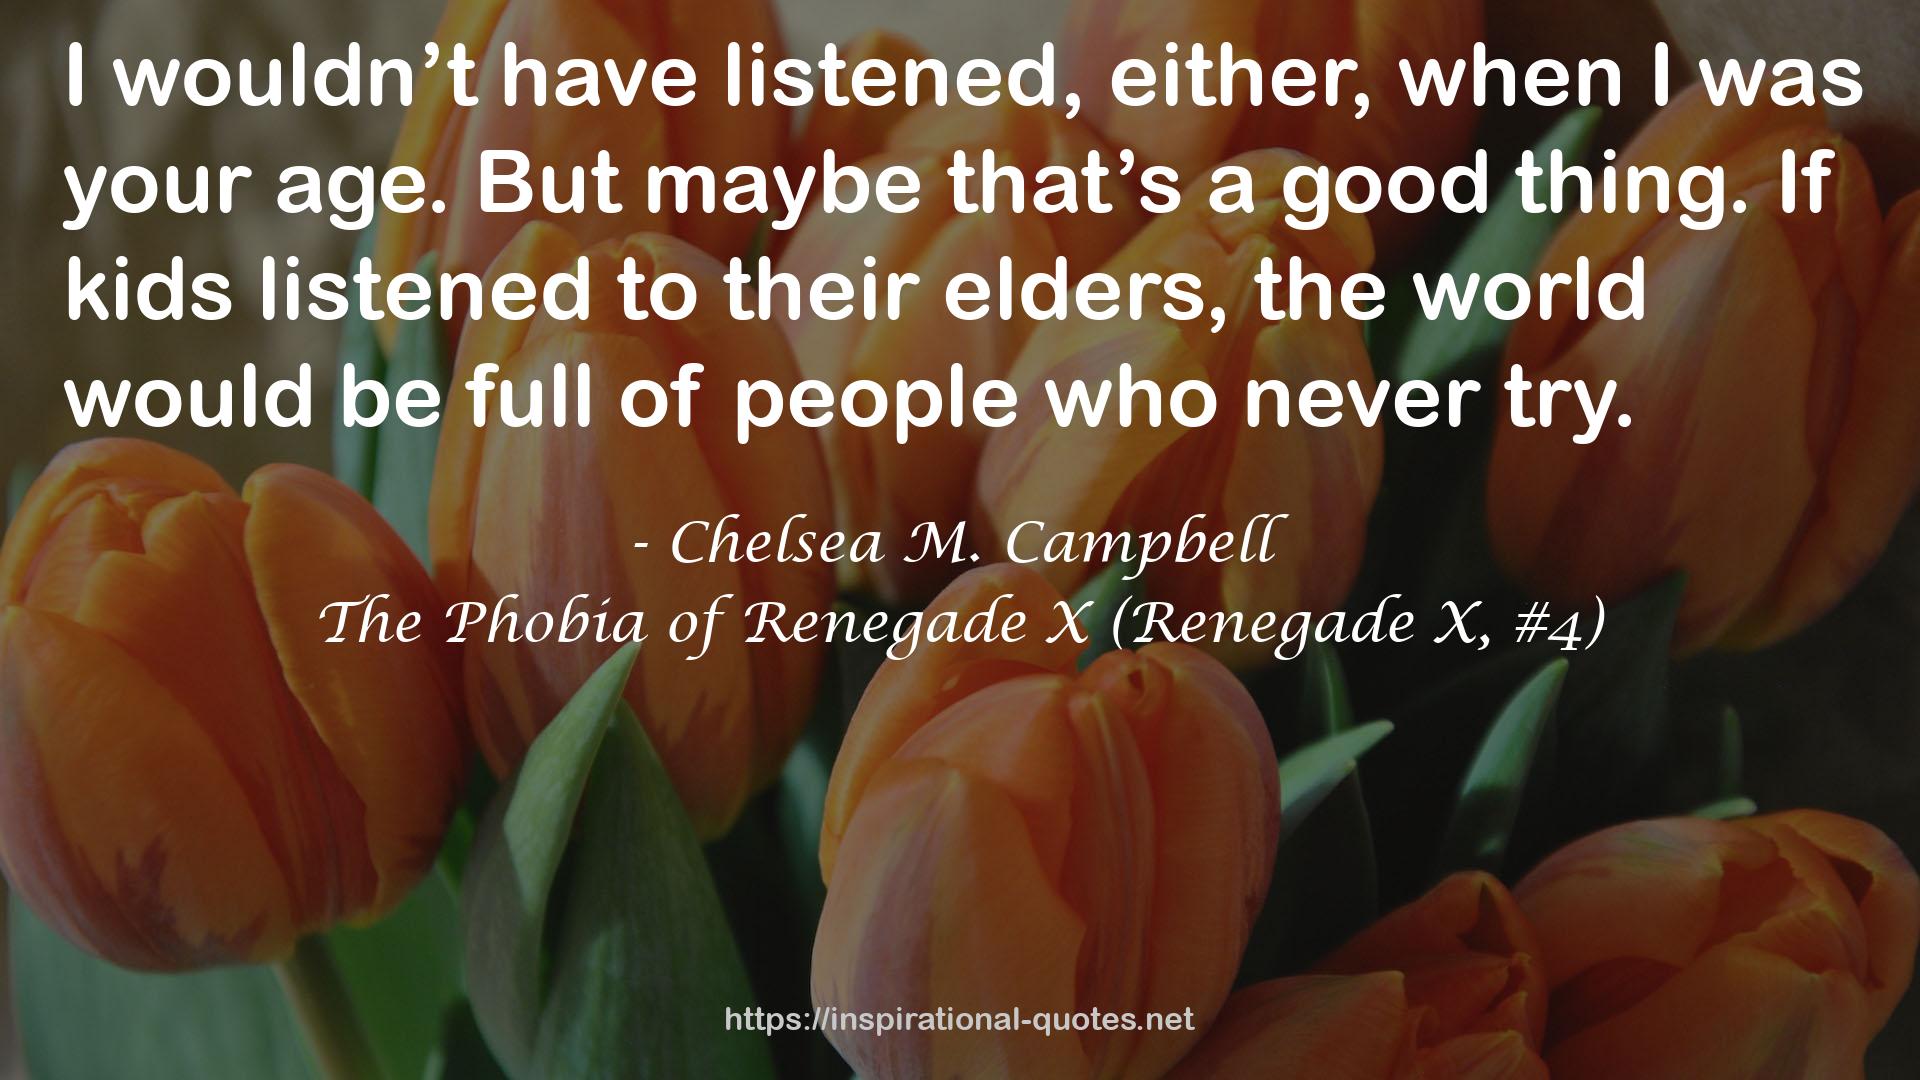 Chelsea M. Campbell QUOTES